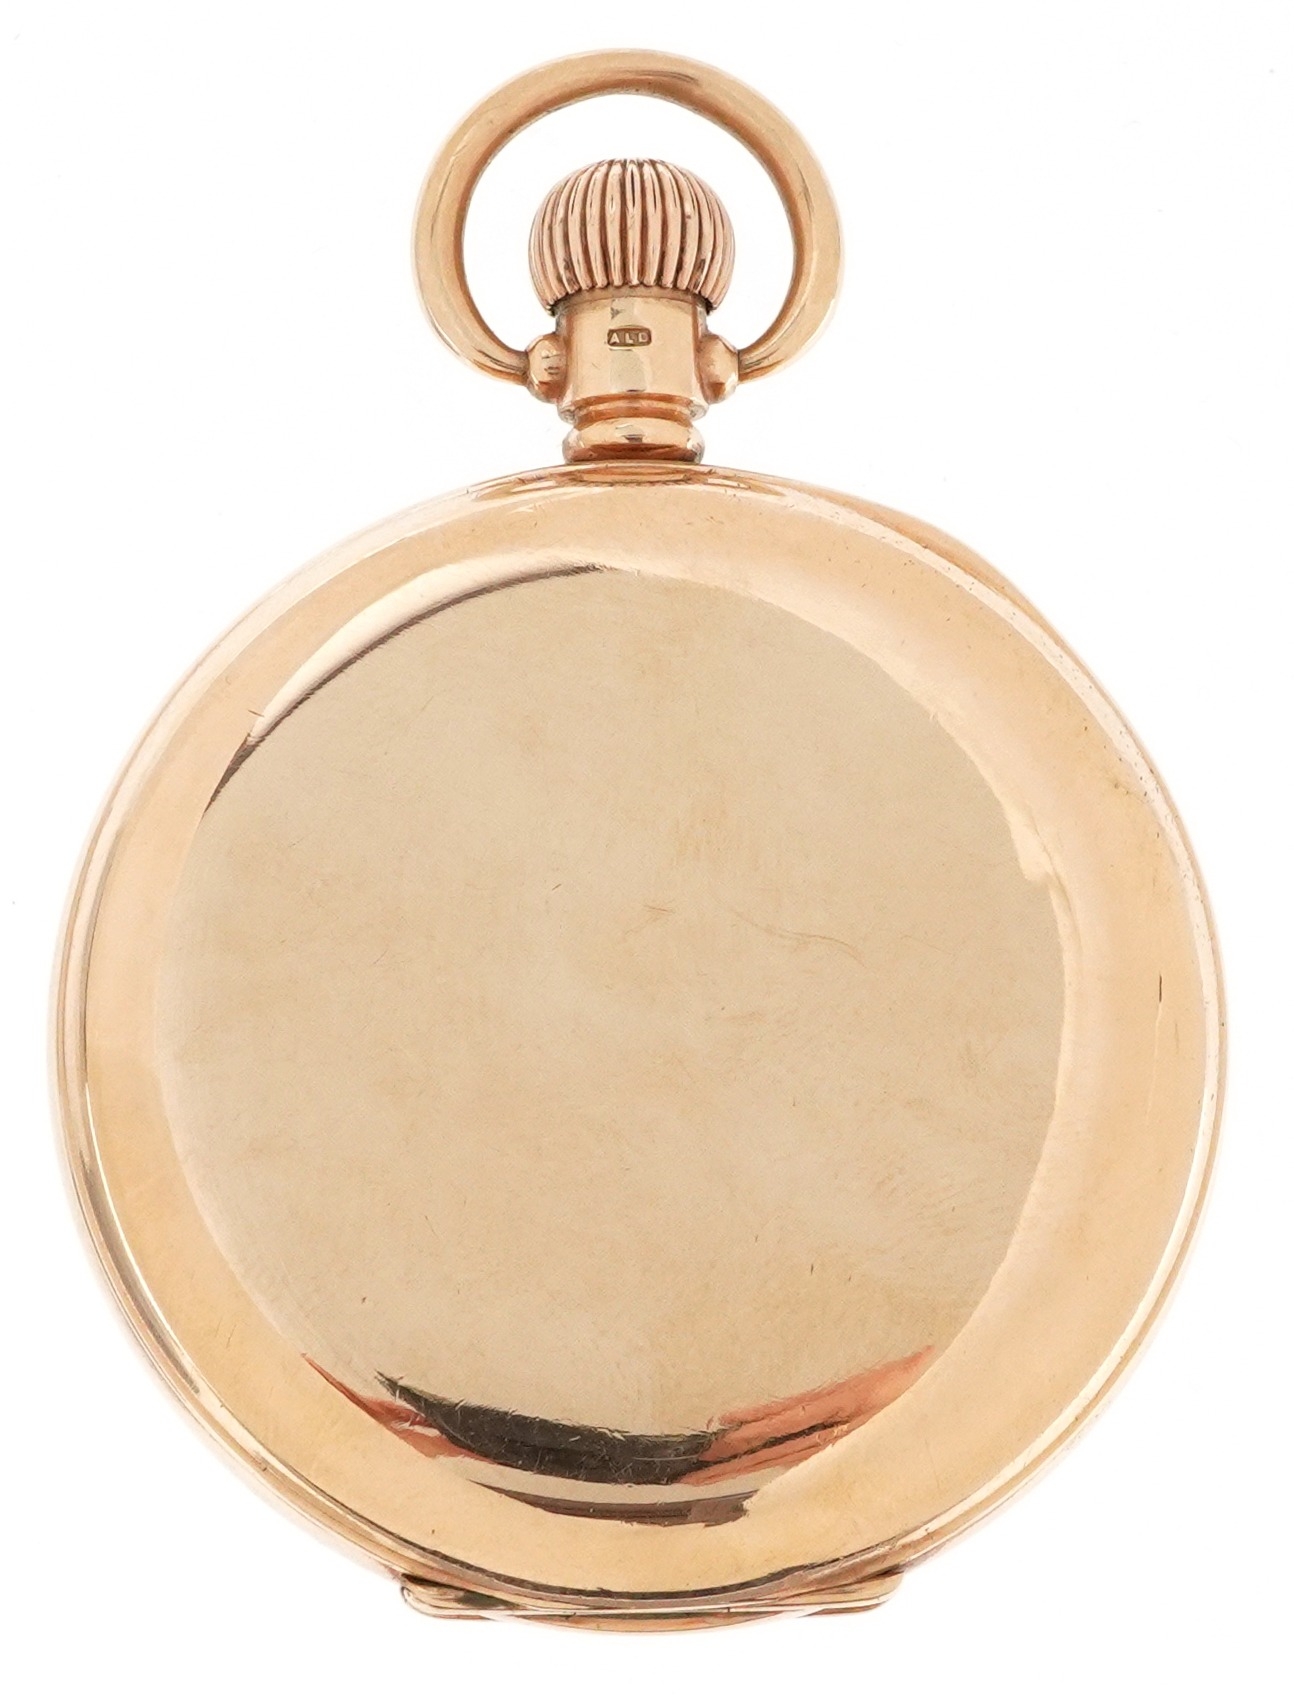 Doxa, gentlemen's 9ct gold open face keyless pocket watch having enamelled and subsidiary dials with - Image 3 of 8